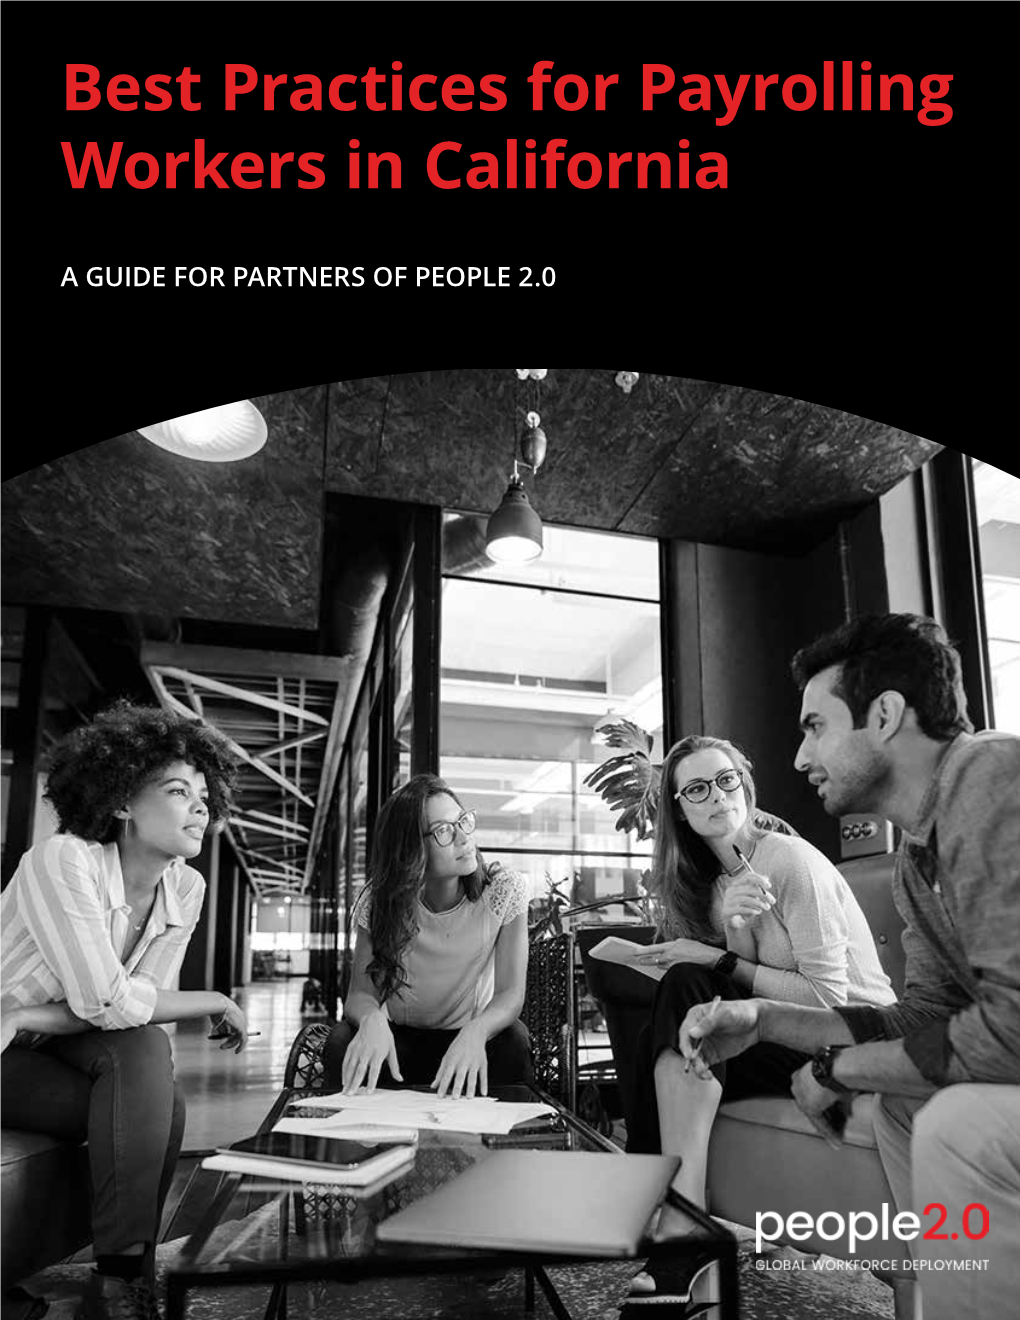 Best Practices for Payrolling Workers in California